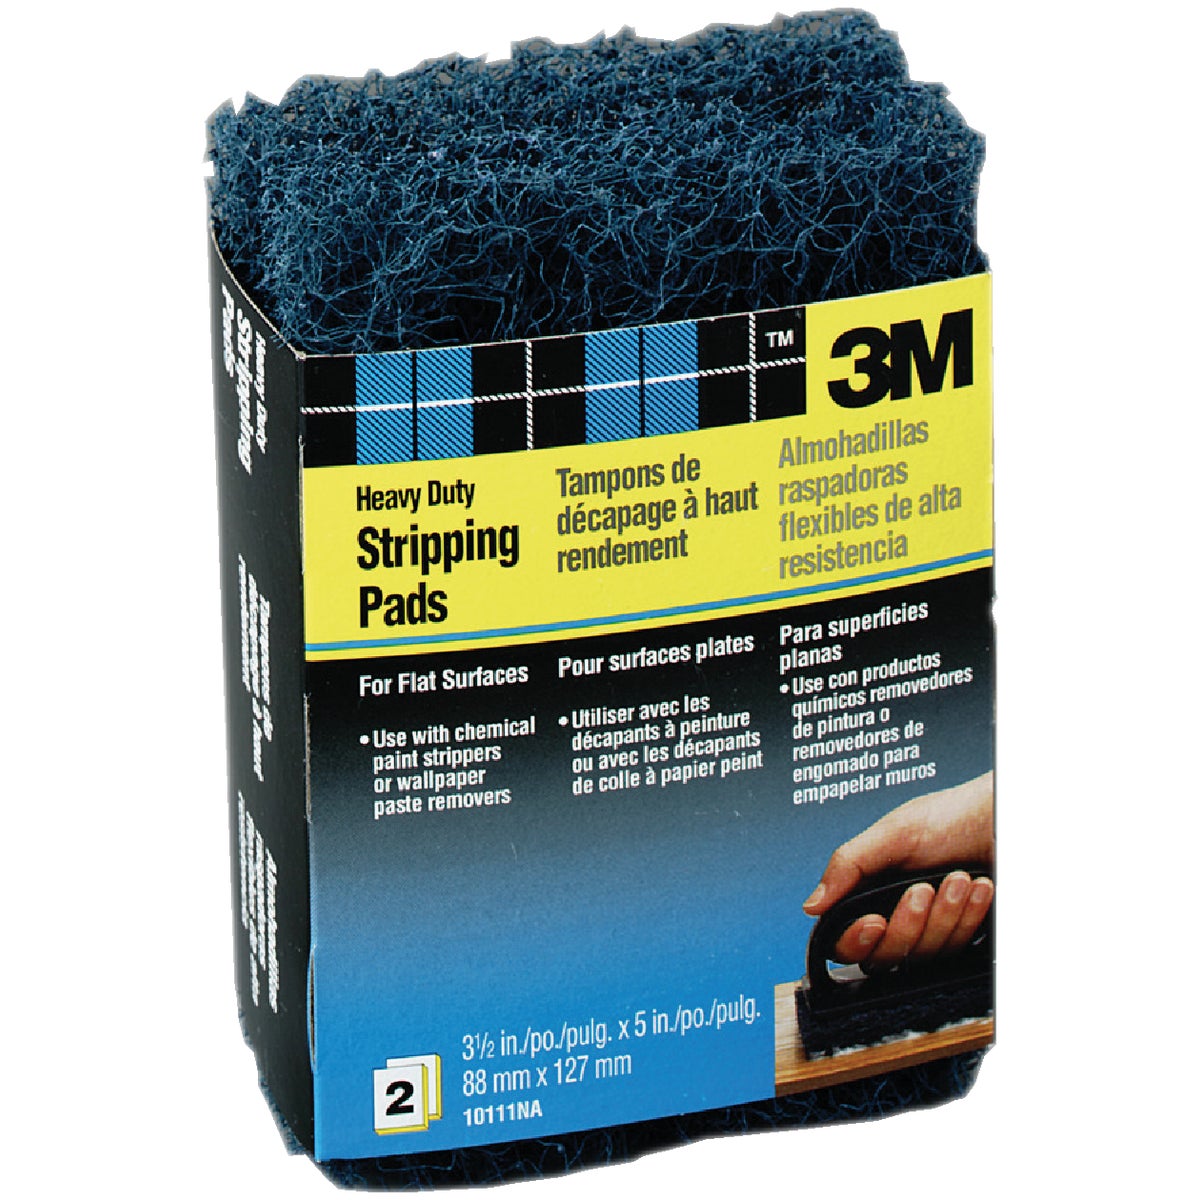 Item 771449, 3M Heavy Duty Stripping Pads are designed to help remove thick coatings of 